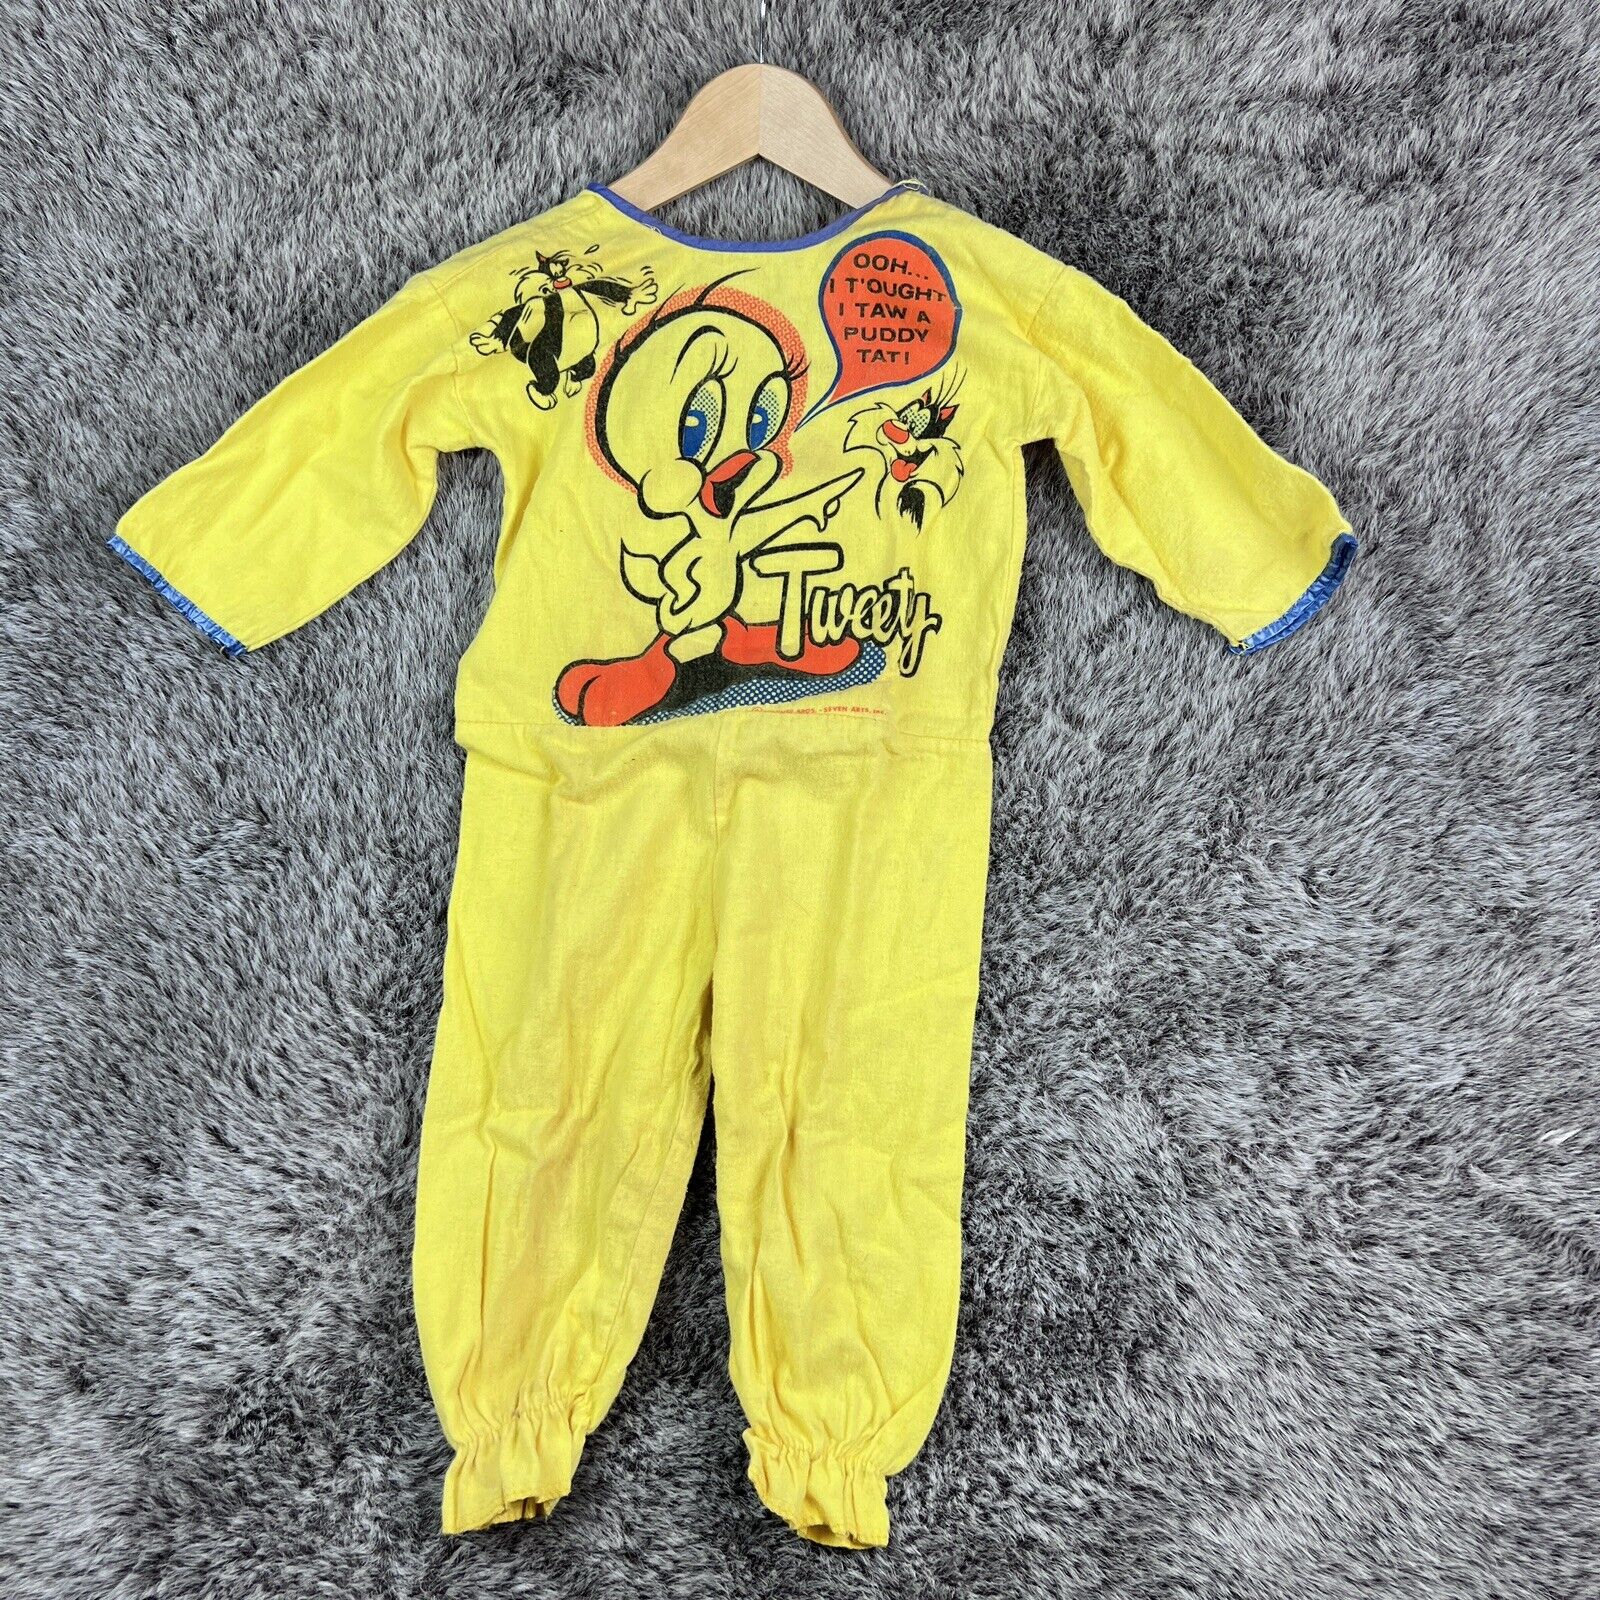 Vintage Warner Bros Tweety Bird Costume 1960s Age 2-4 Ooh I T\'ought I Taw a Pudd